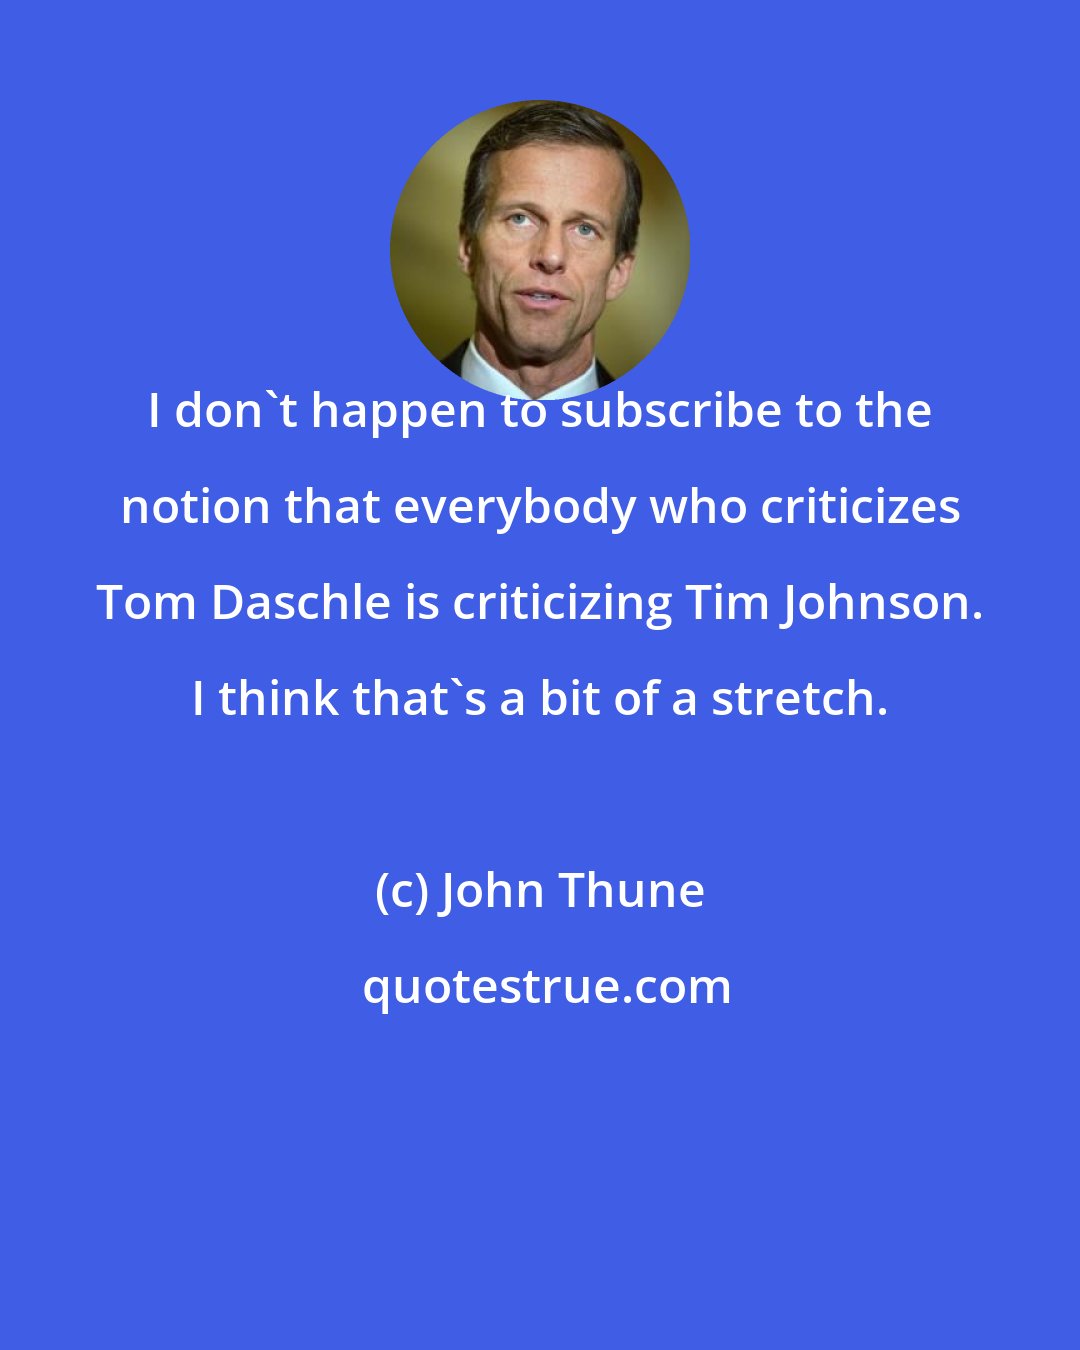 John Thune: I don't happen to subscribe to the notion that everybody who criticizes Tom Daschle is criticizing Tim Johnson. I think that's a bit of a stretch.